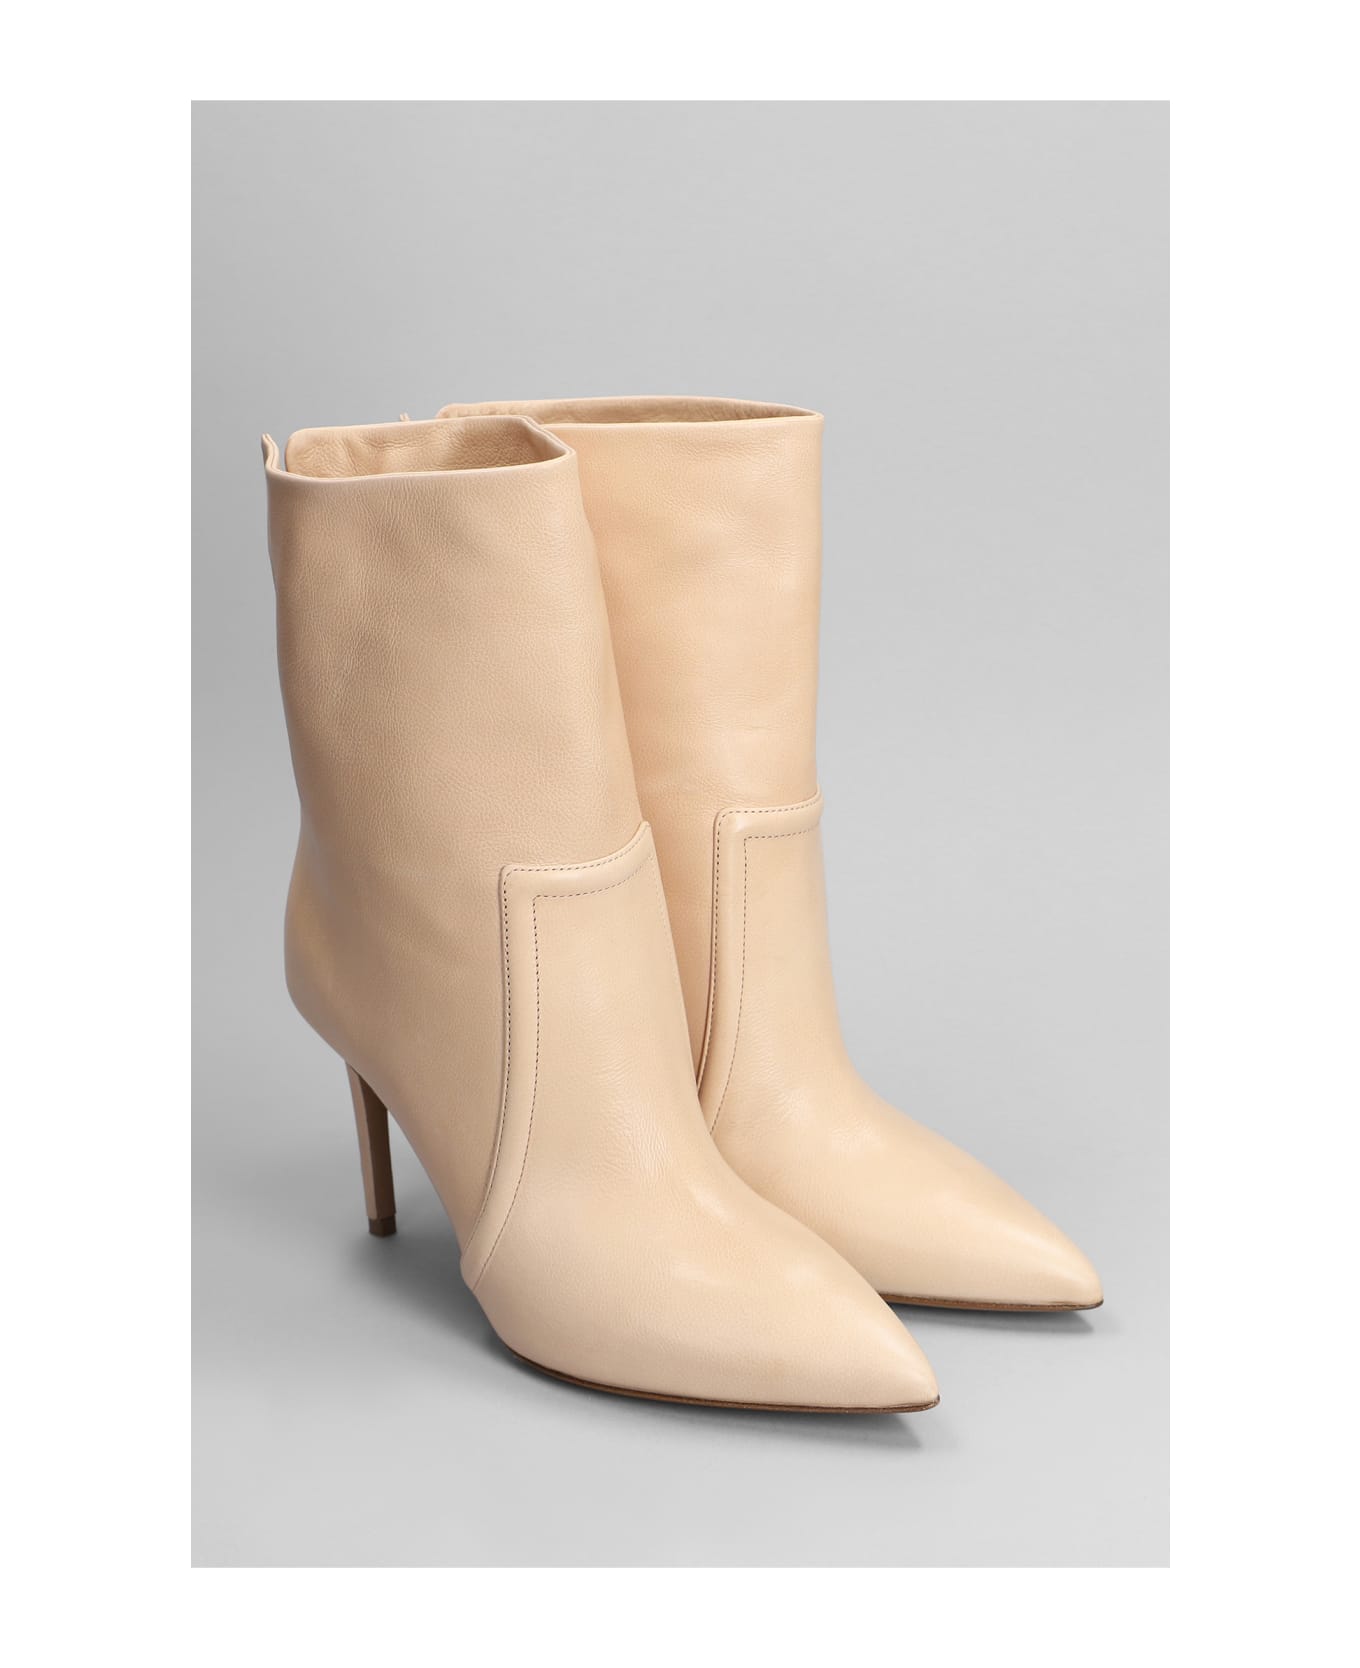 Paris Texas High Heels Ankle Boots In Powder Leather - powder